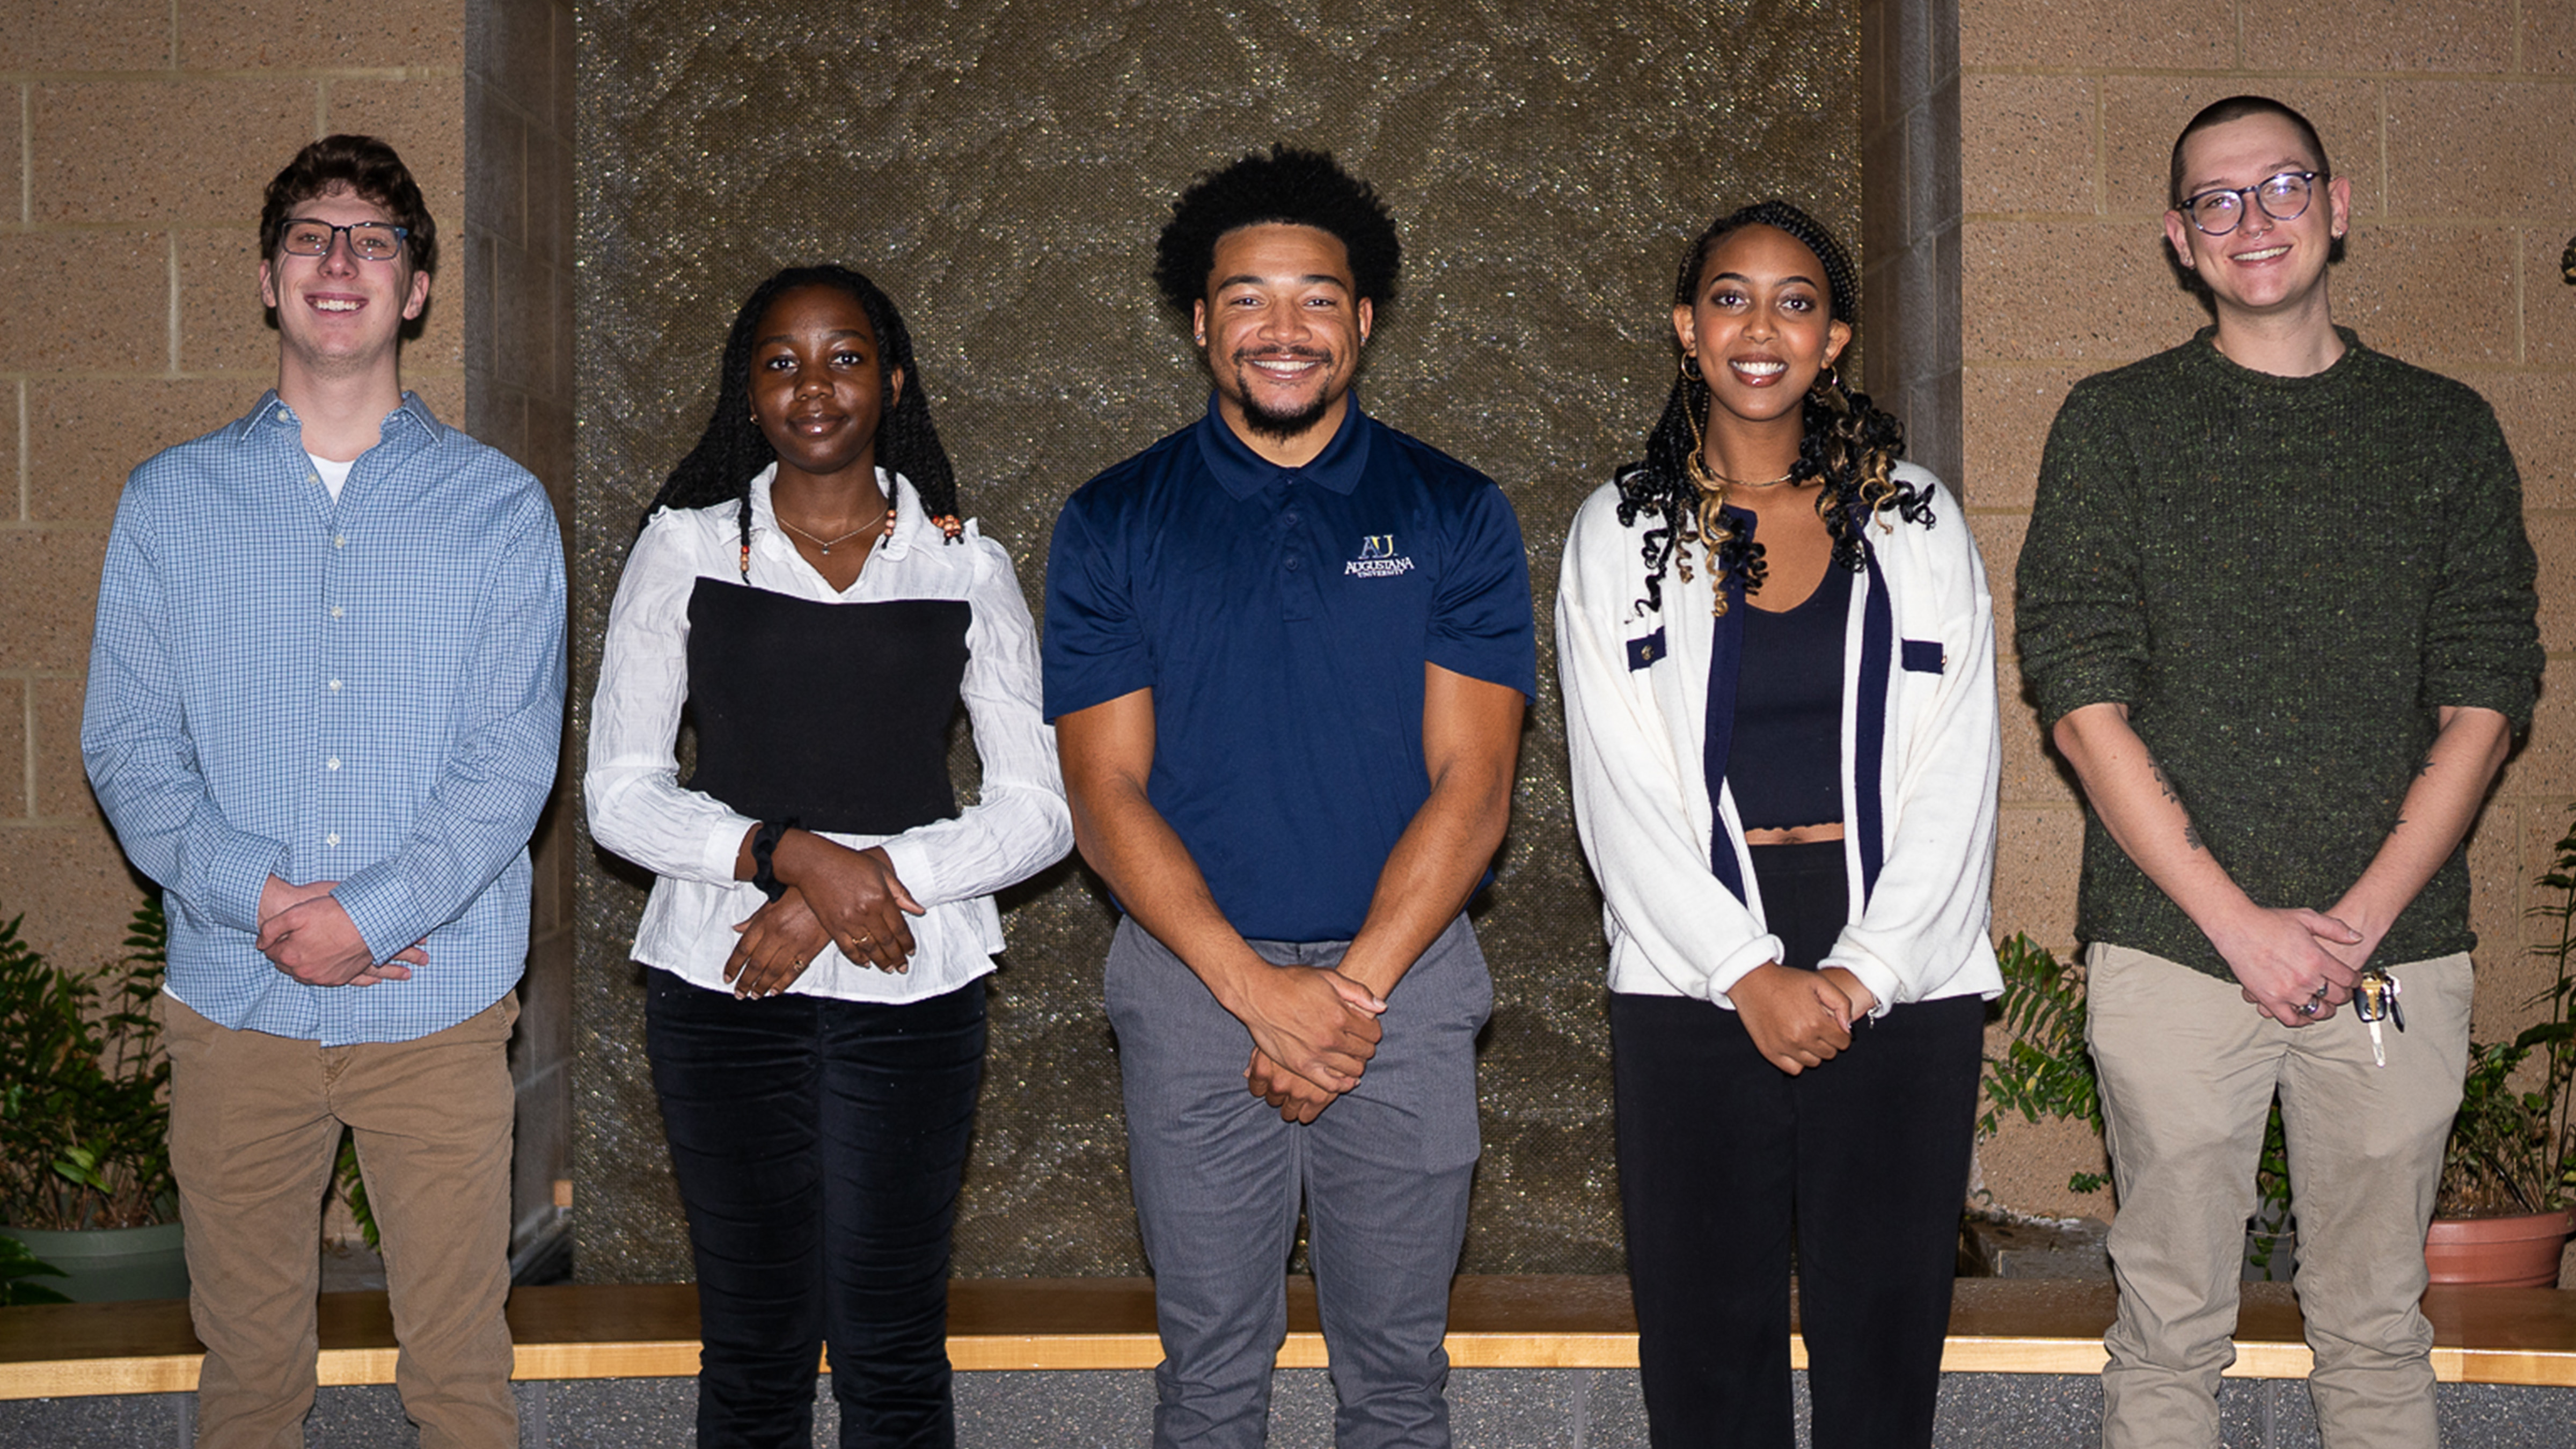 ASA Diversity, Equity & Social Justice Committee